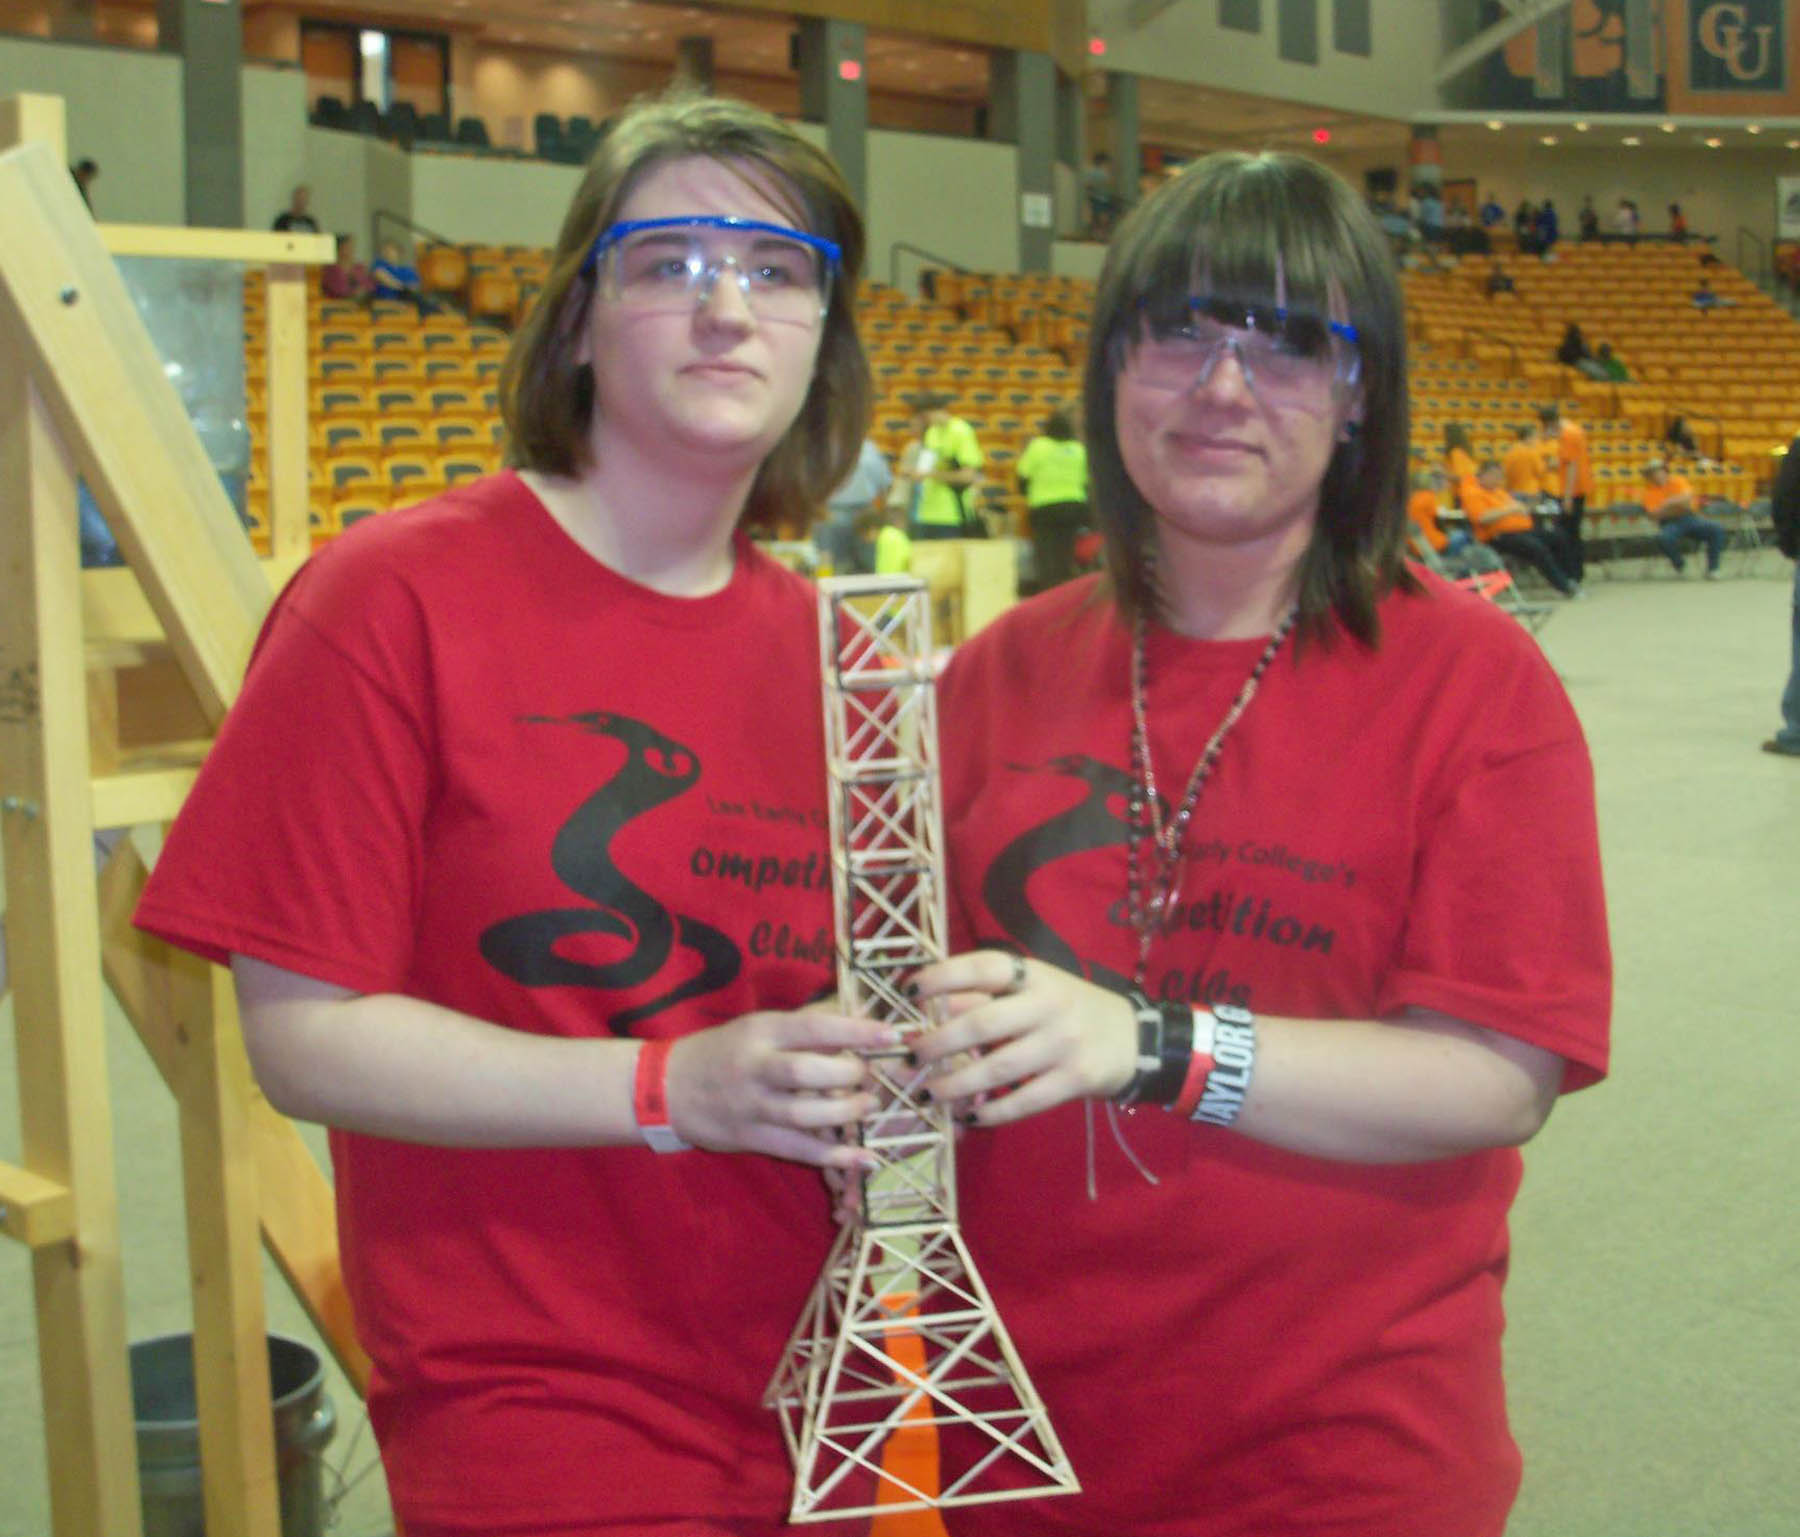 Lee Early College wins at Science Olympiad